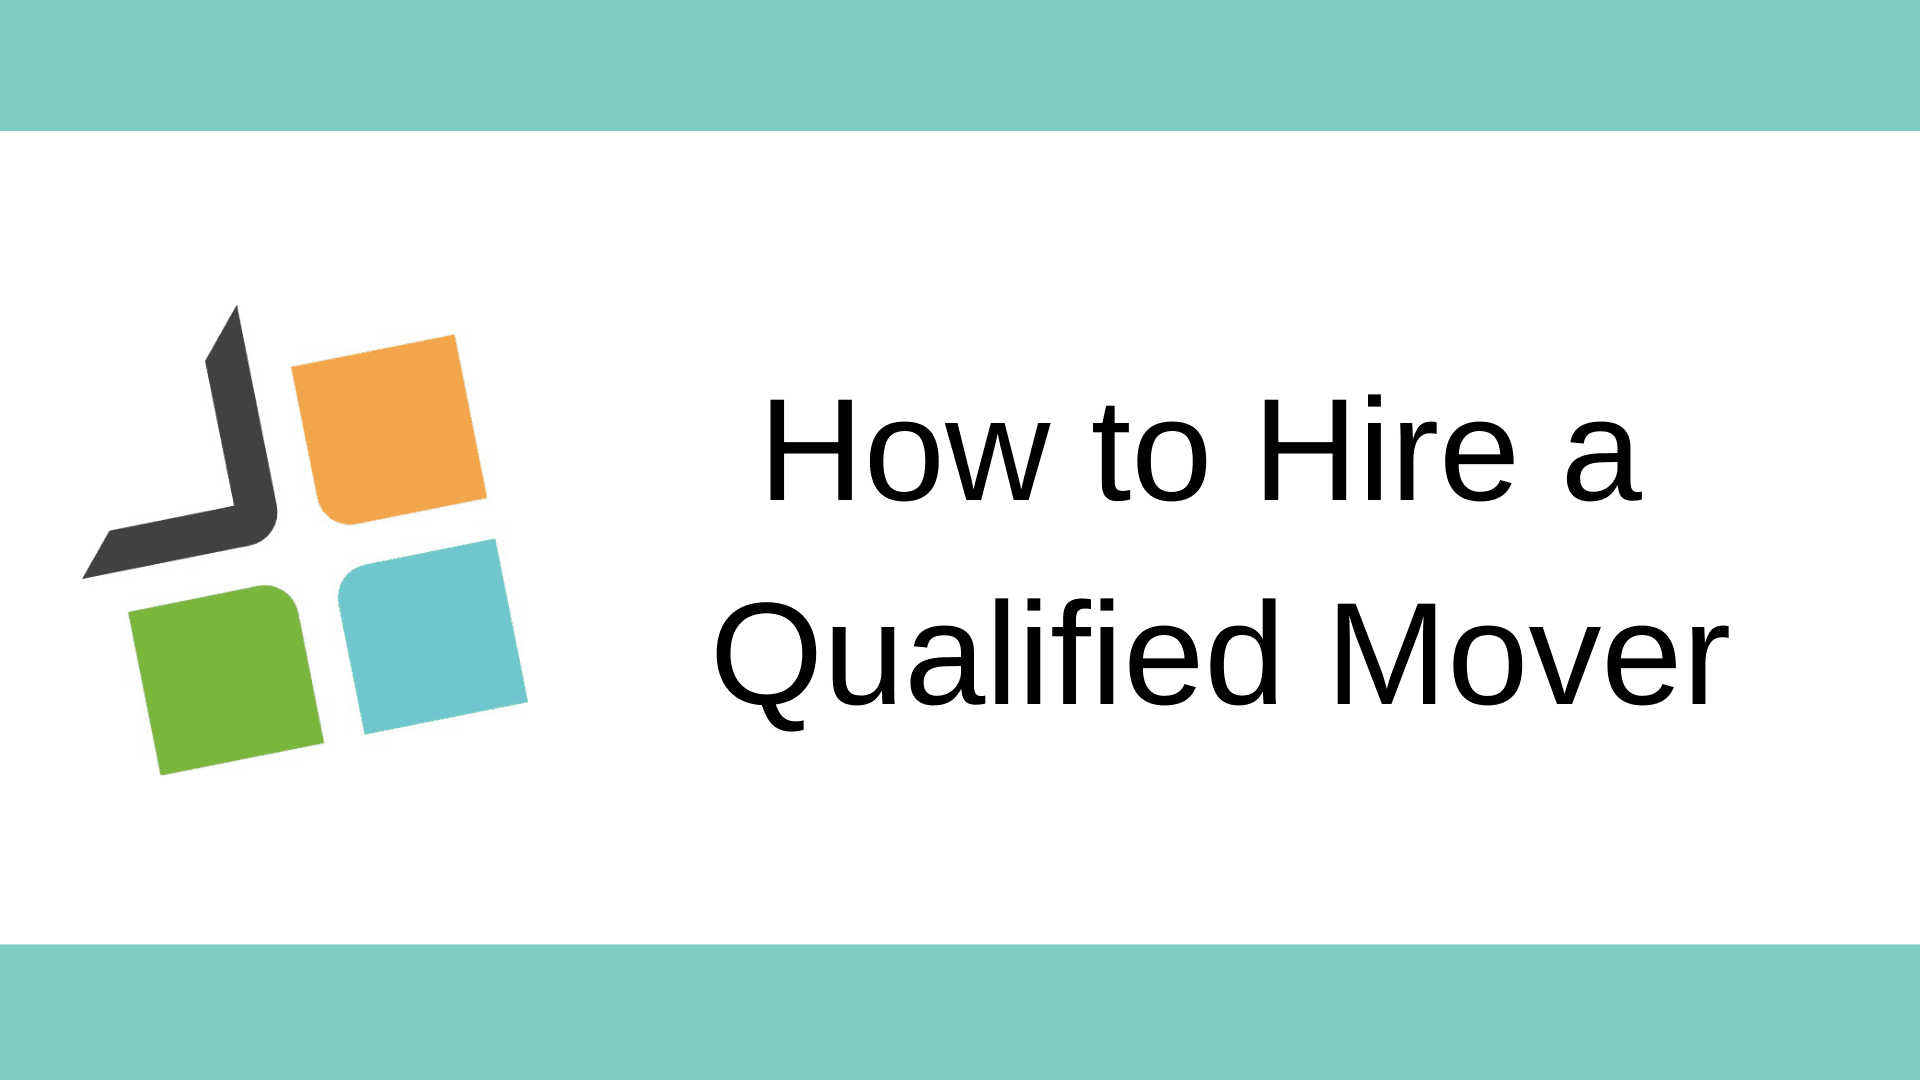 How to Hire a Qualified Mover